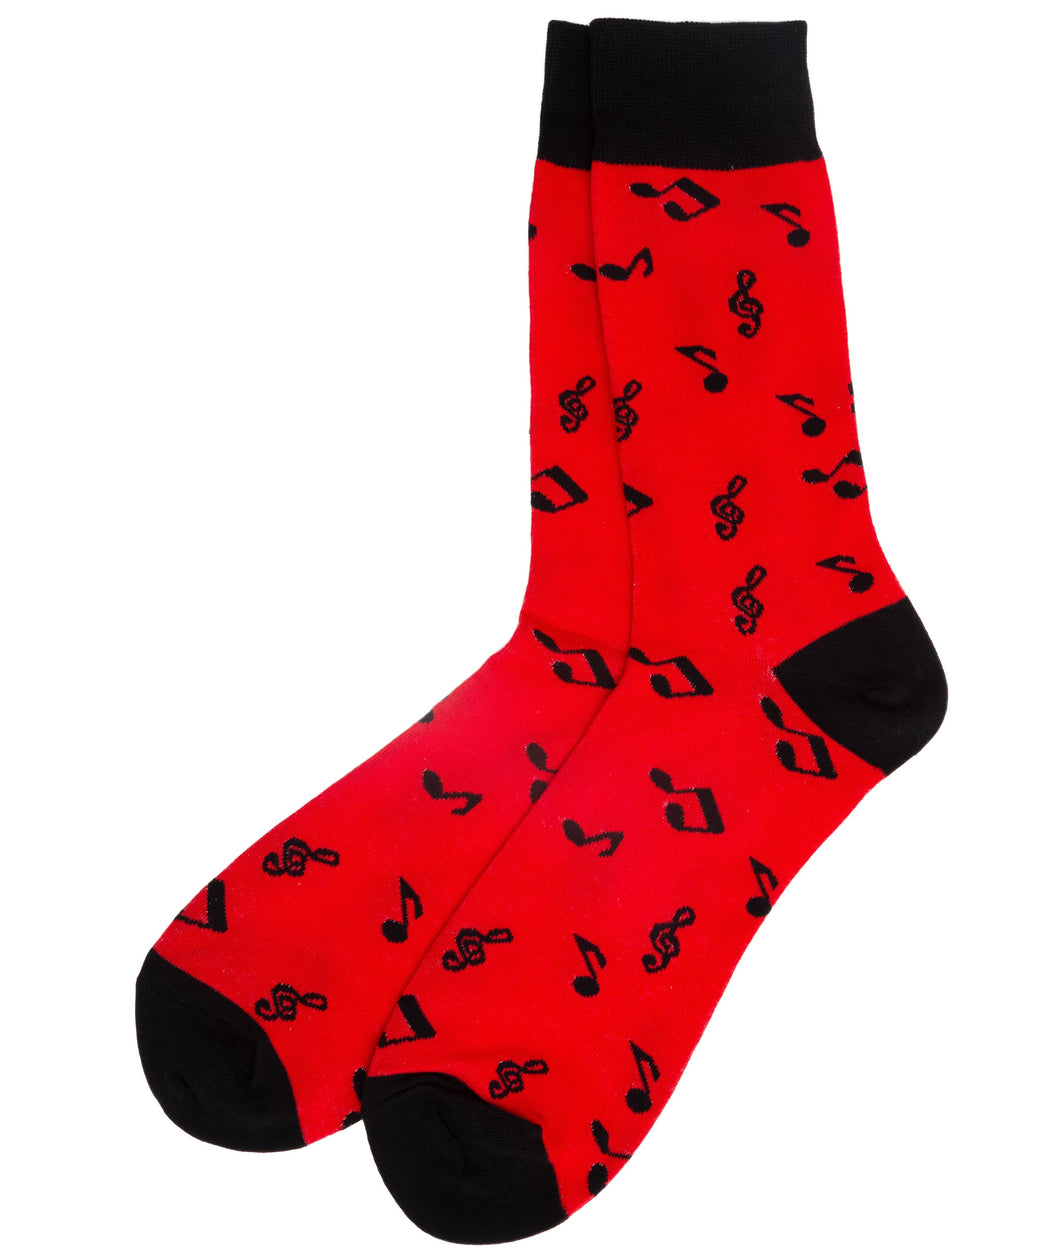 music note socks bright red and black